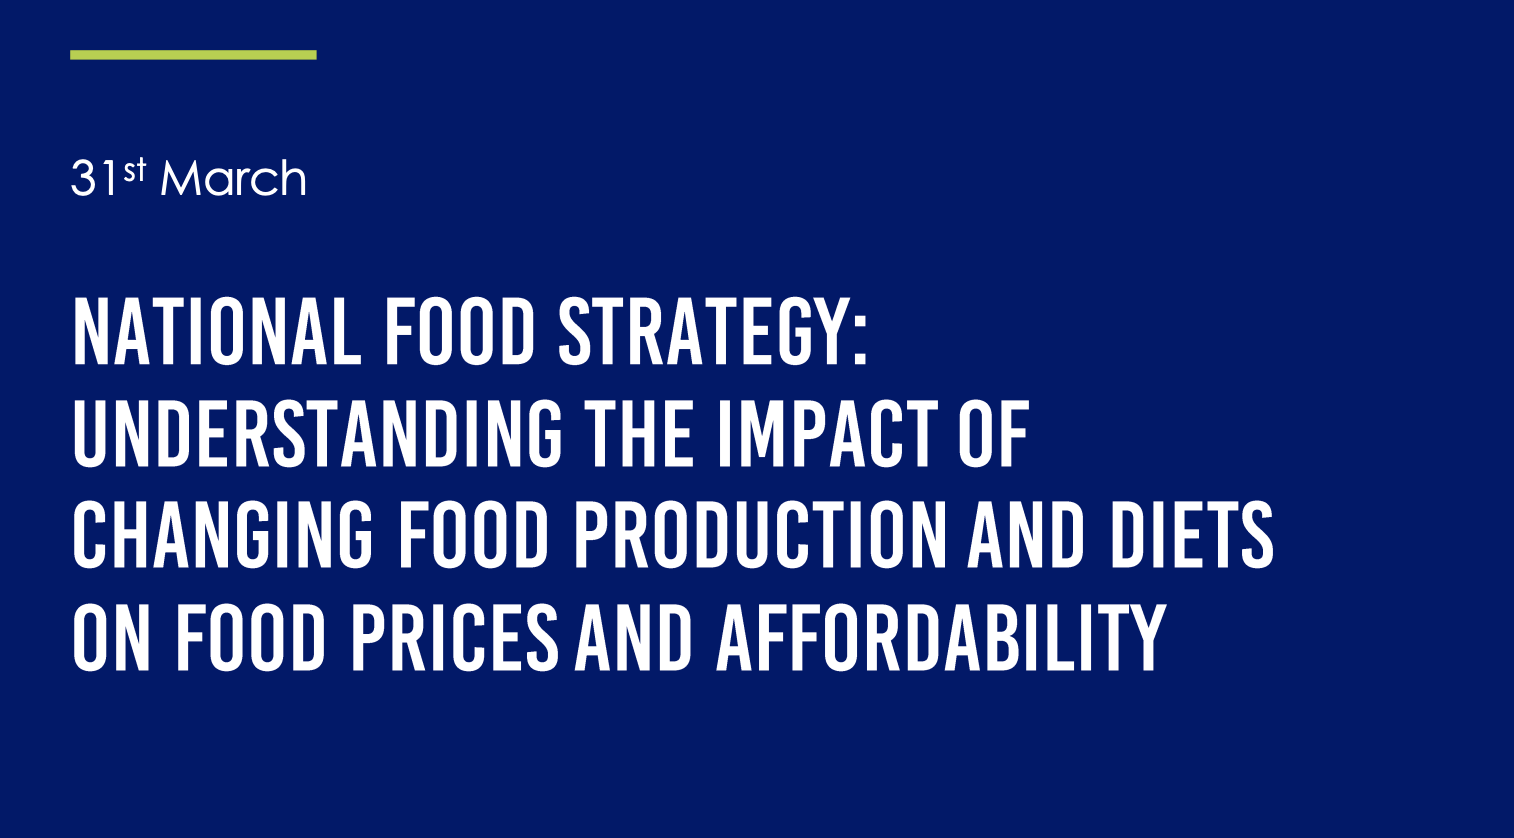 The Impact of Changing Food Production and Diets on Food Prices and Affordability